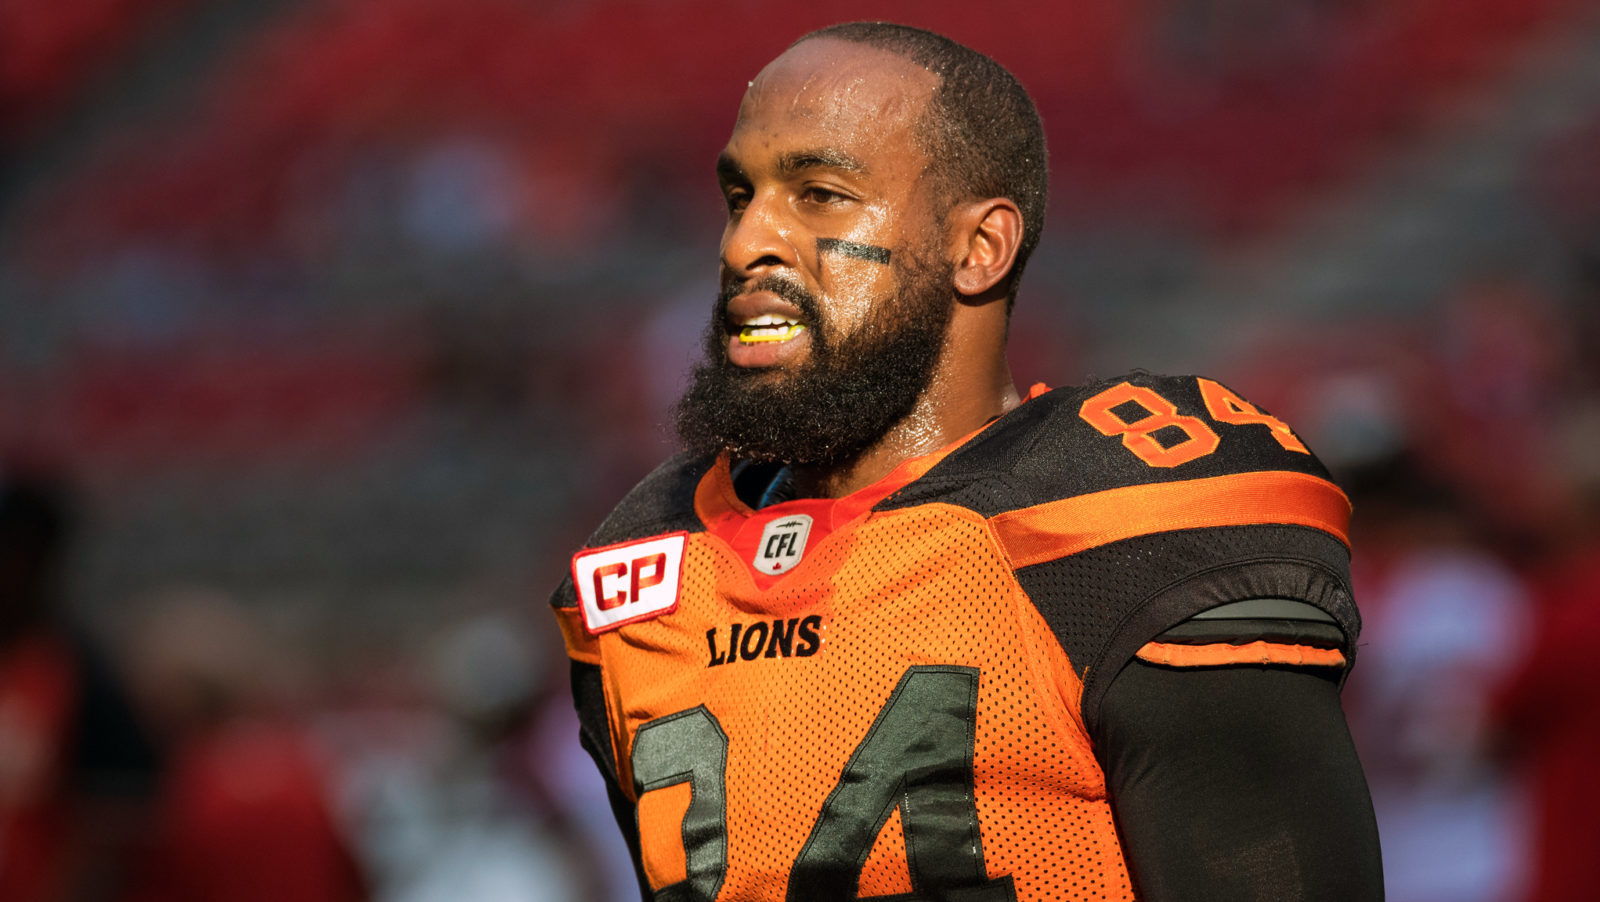 Arceneaux enters 2022 with nine CFL seasons to his name, including eight with the B.C. Lions. Photo credit: Jimmy Jeong/CFL.ca